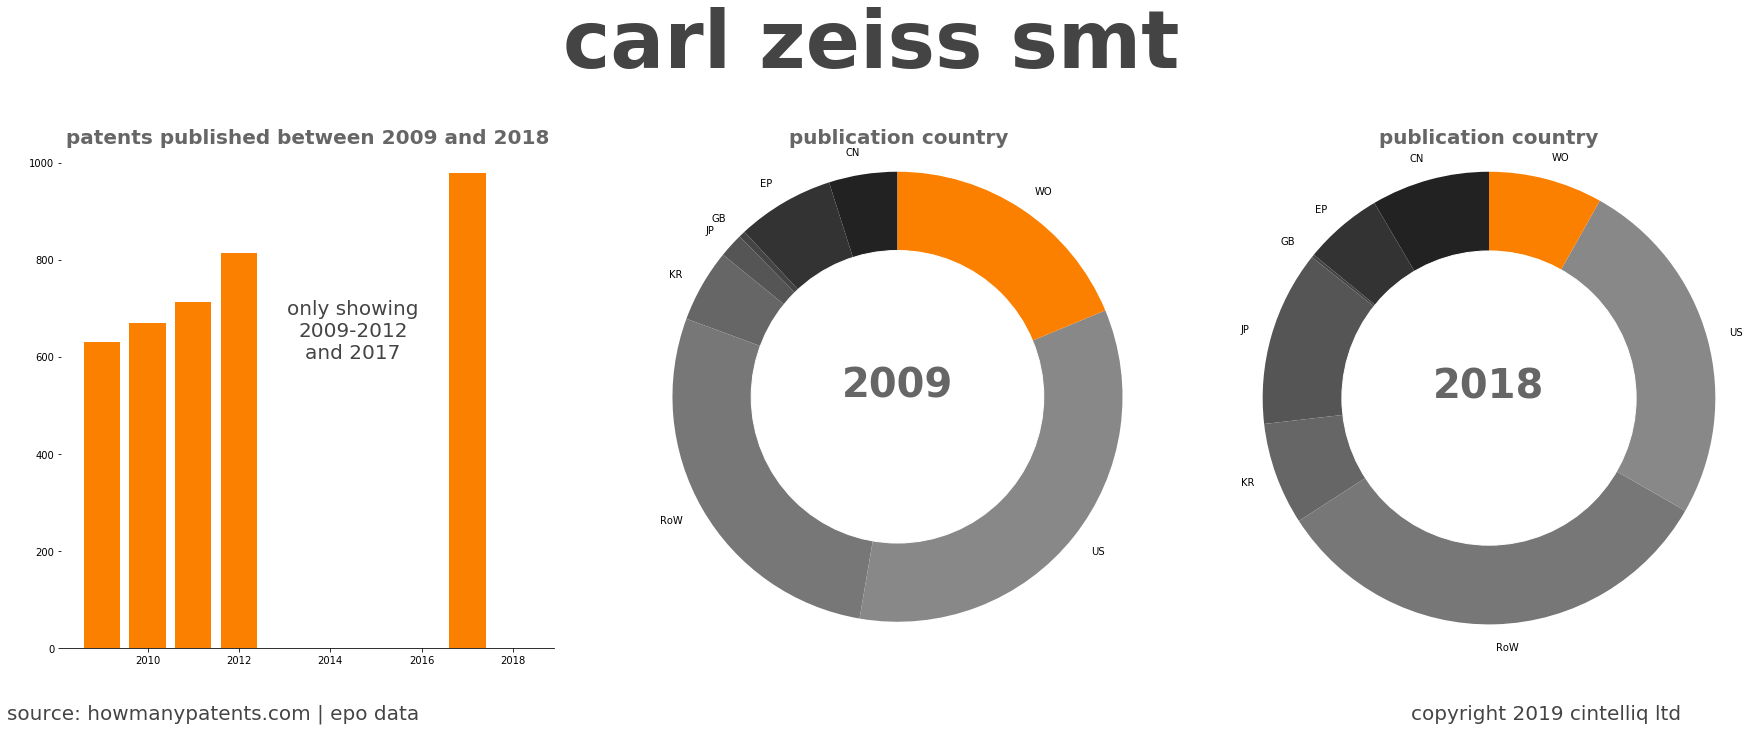 summary of patents for Carl Zeiss Smt